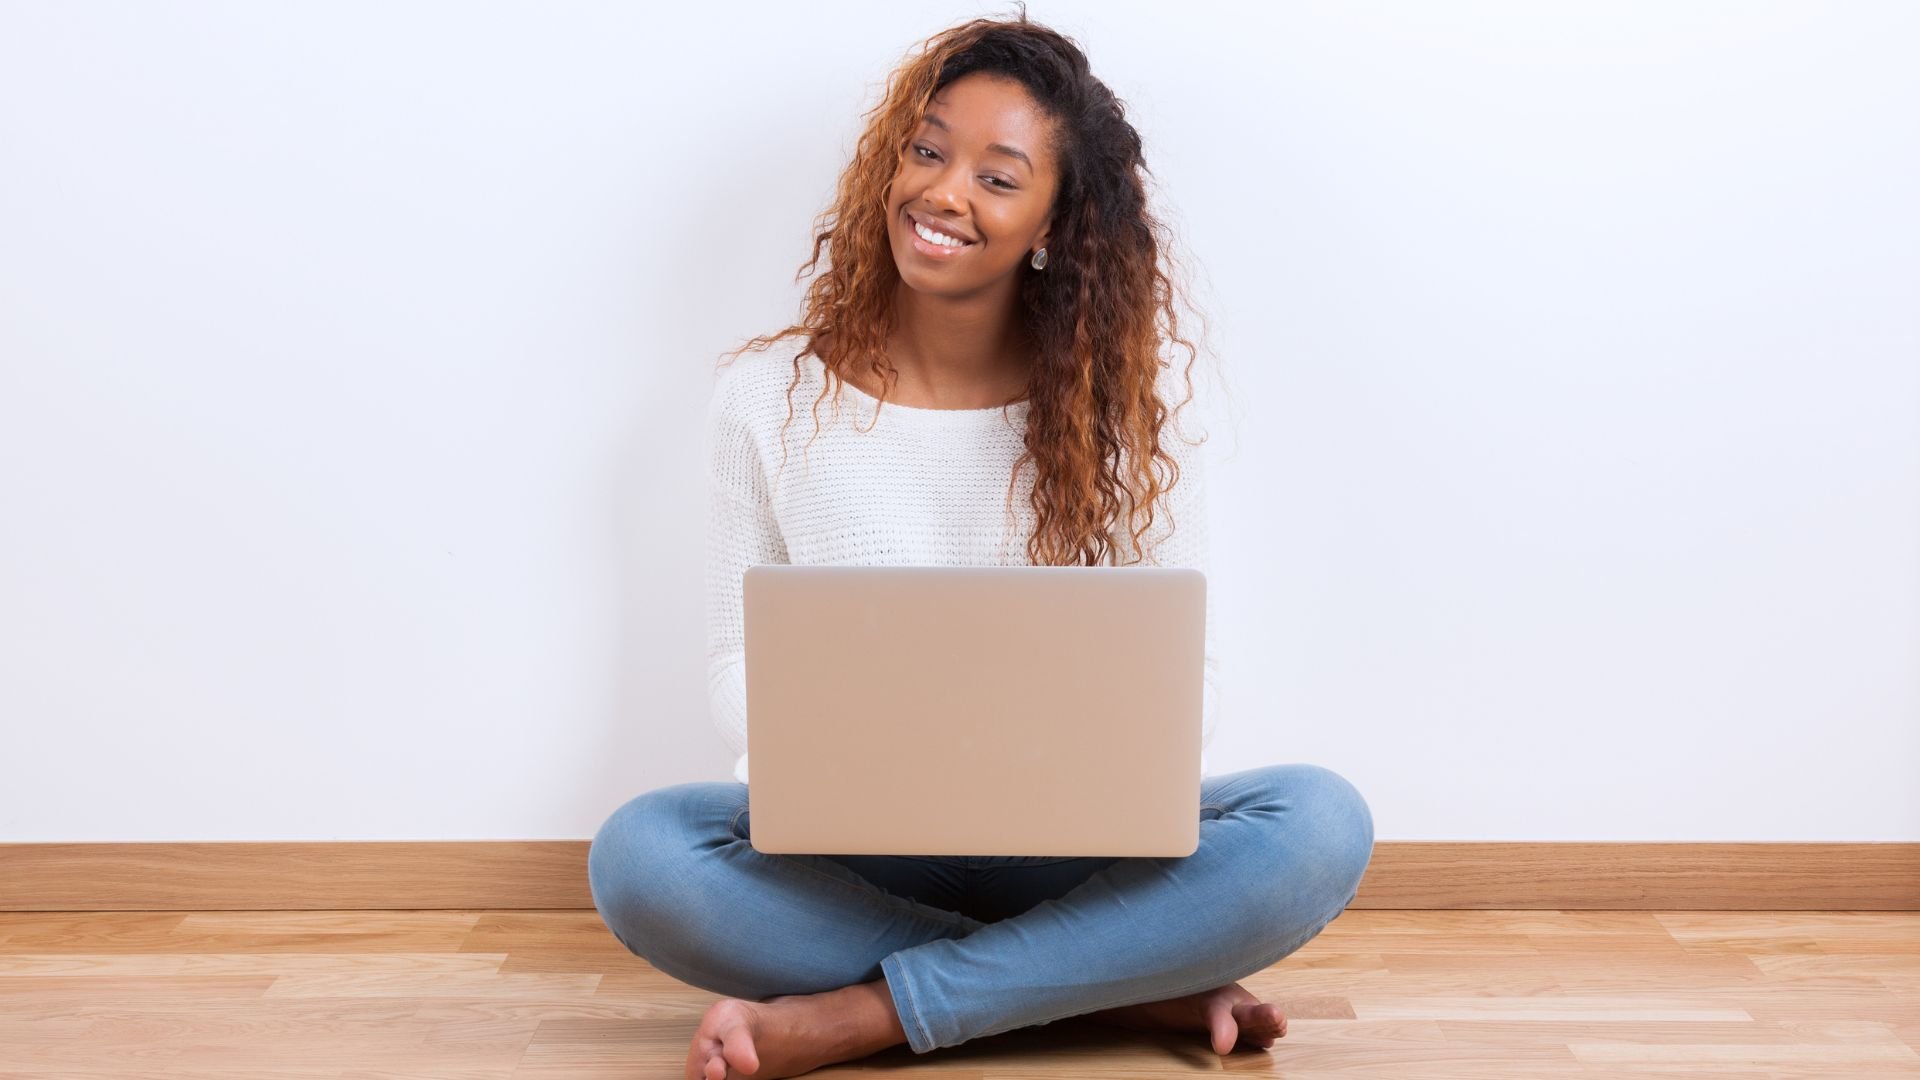 Woman sitting on the floor with laptop smiling